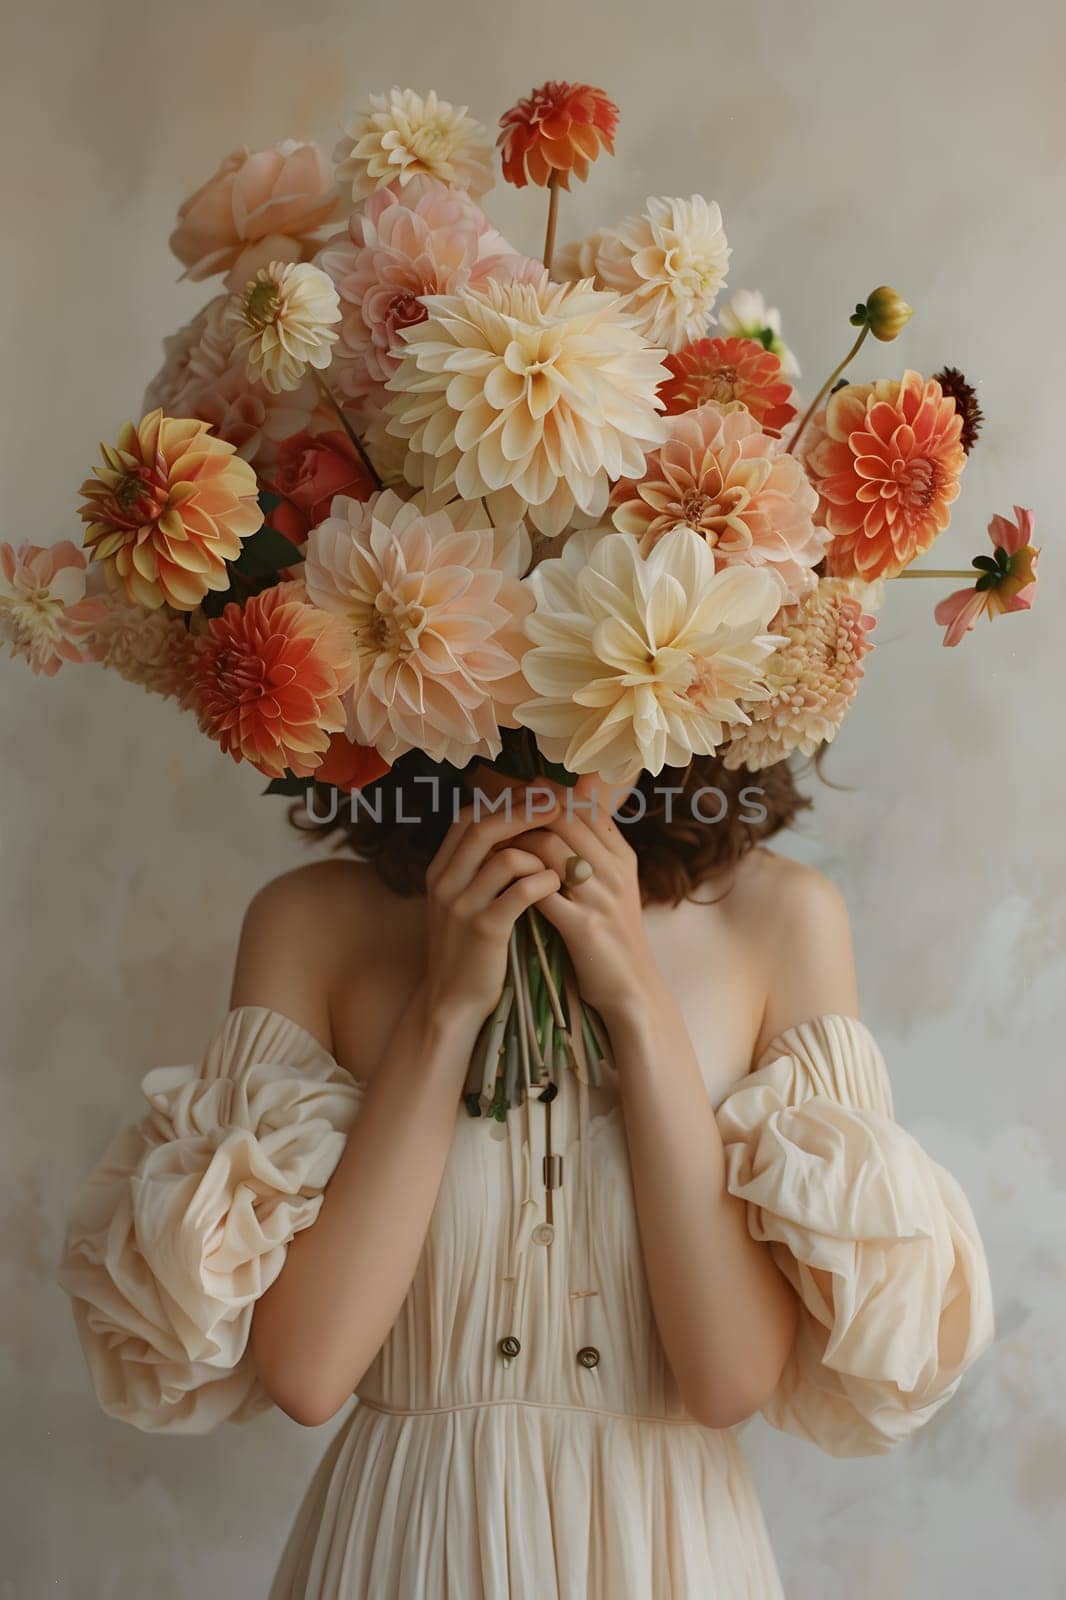 A woman in a white dress creatively arranged a bouquet of peach flowers in front of her face, showcasing the natural beauty of the flowering plants petals